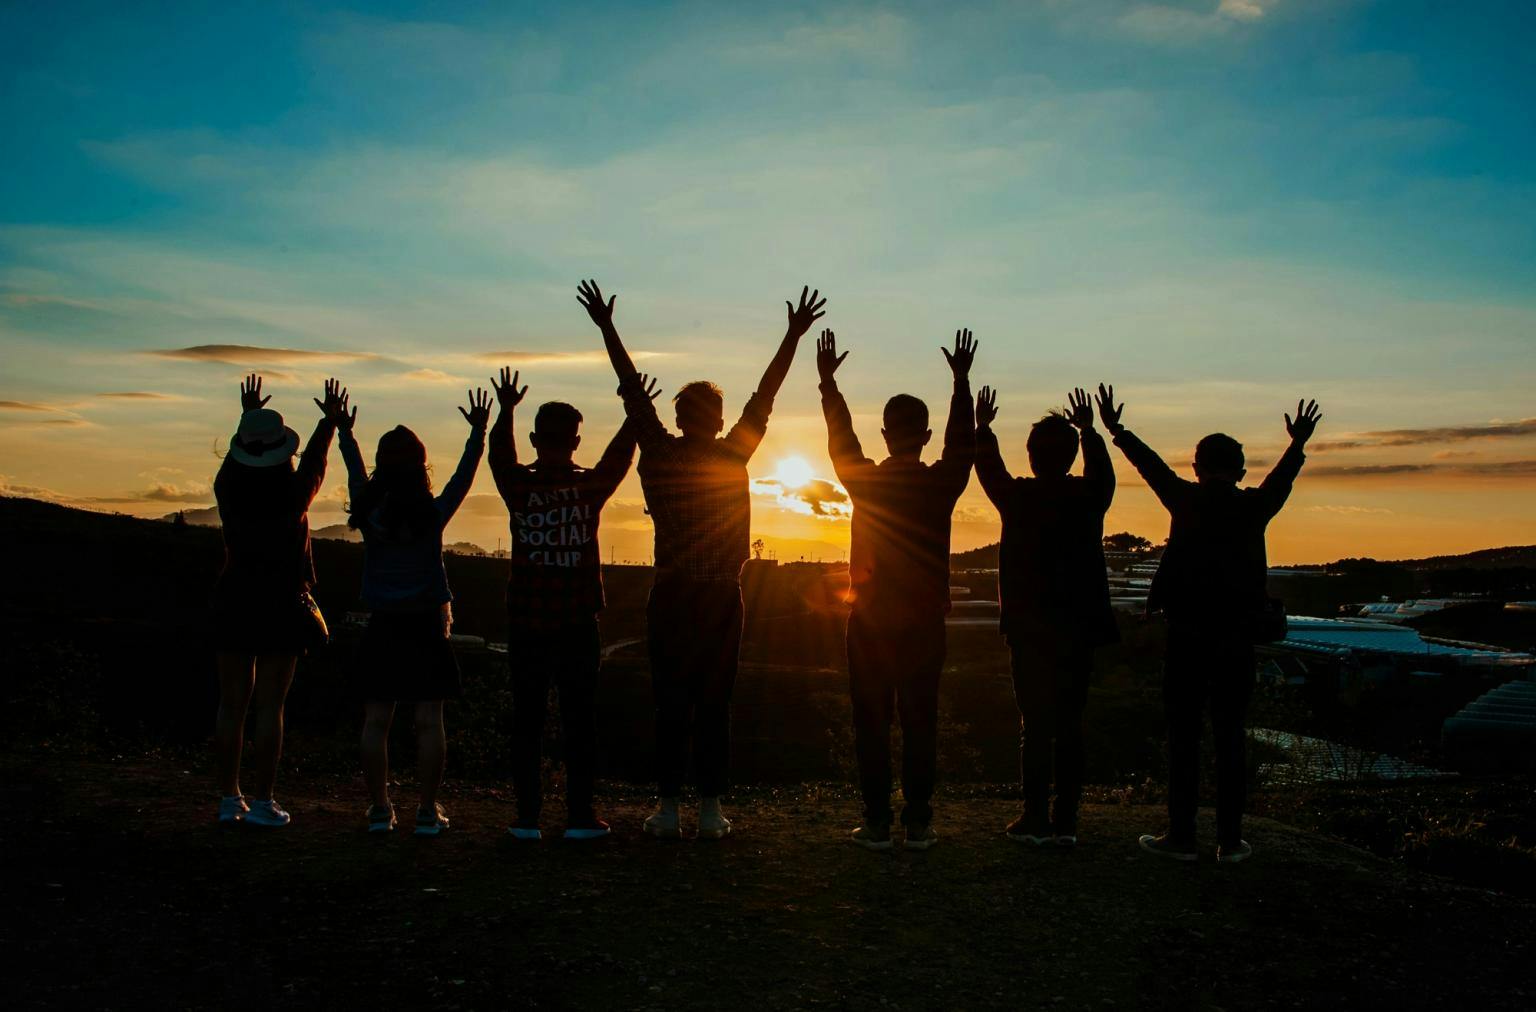 Silhouettes of a group of people watching the sun go down in the distance, arms raised in celebration.